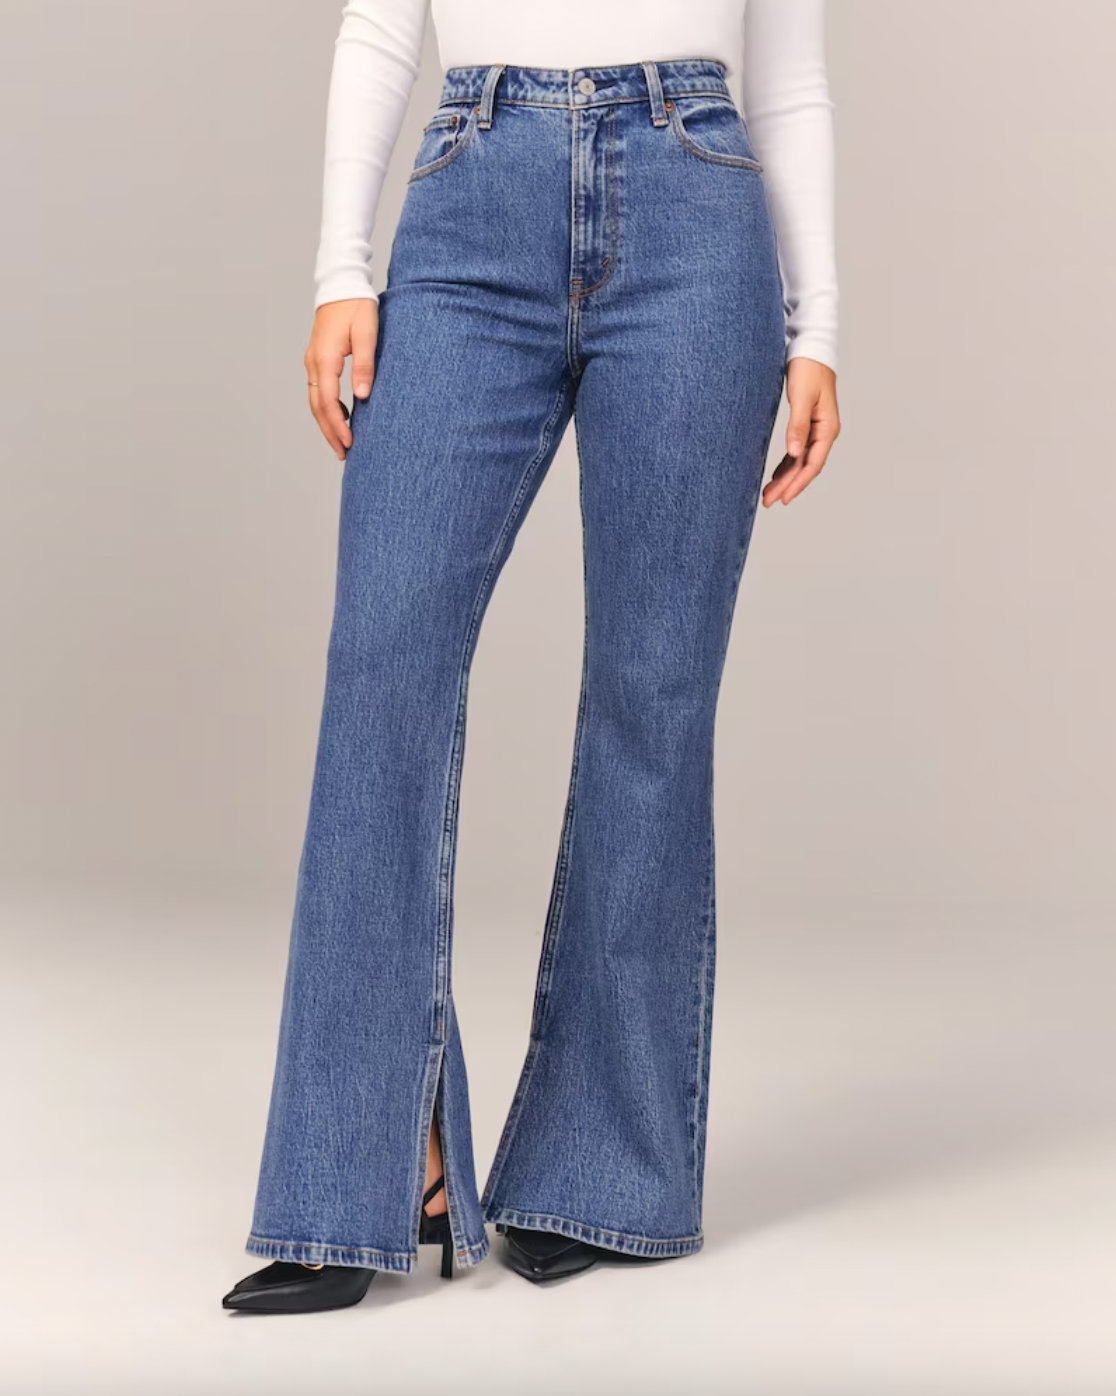 Abercrombie & Fitch + Curve Love High Rise Vintage Flare Jean